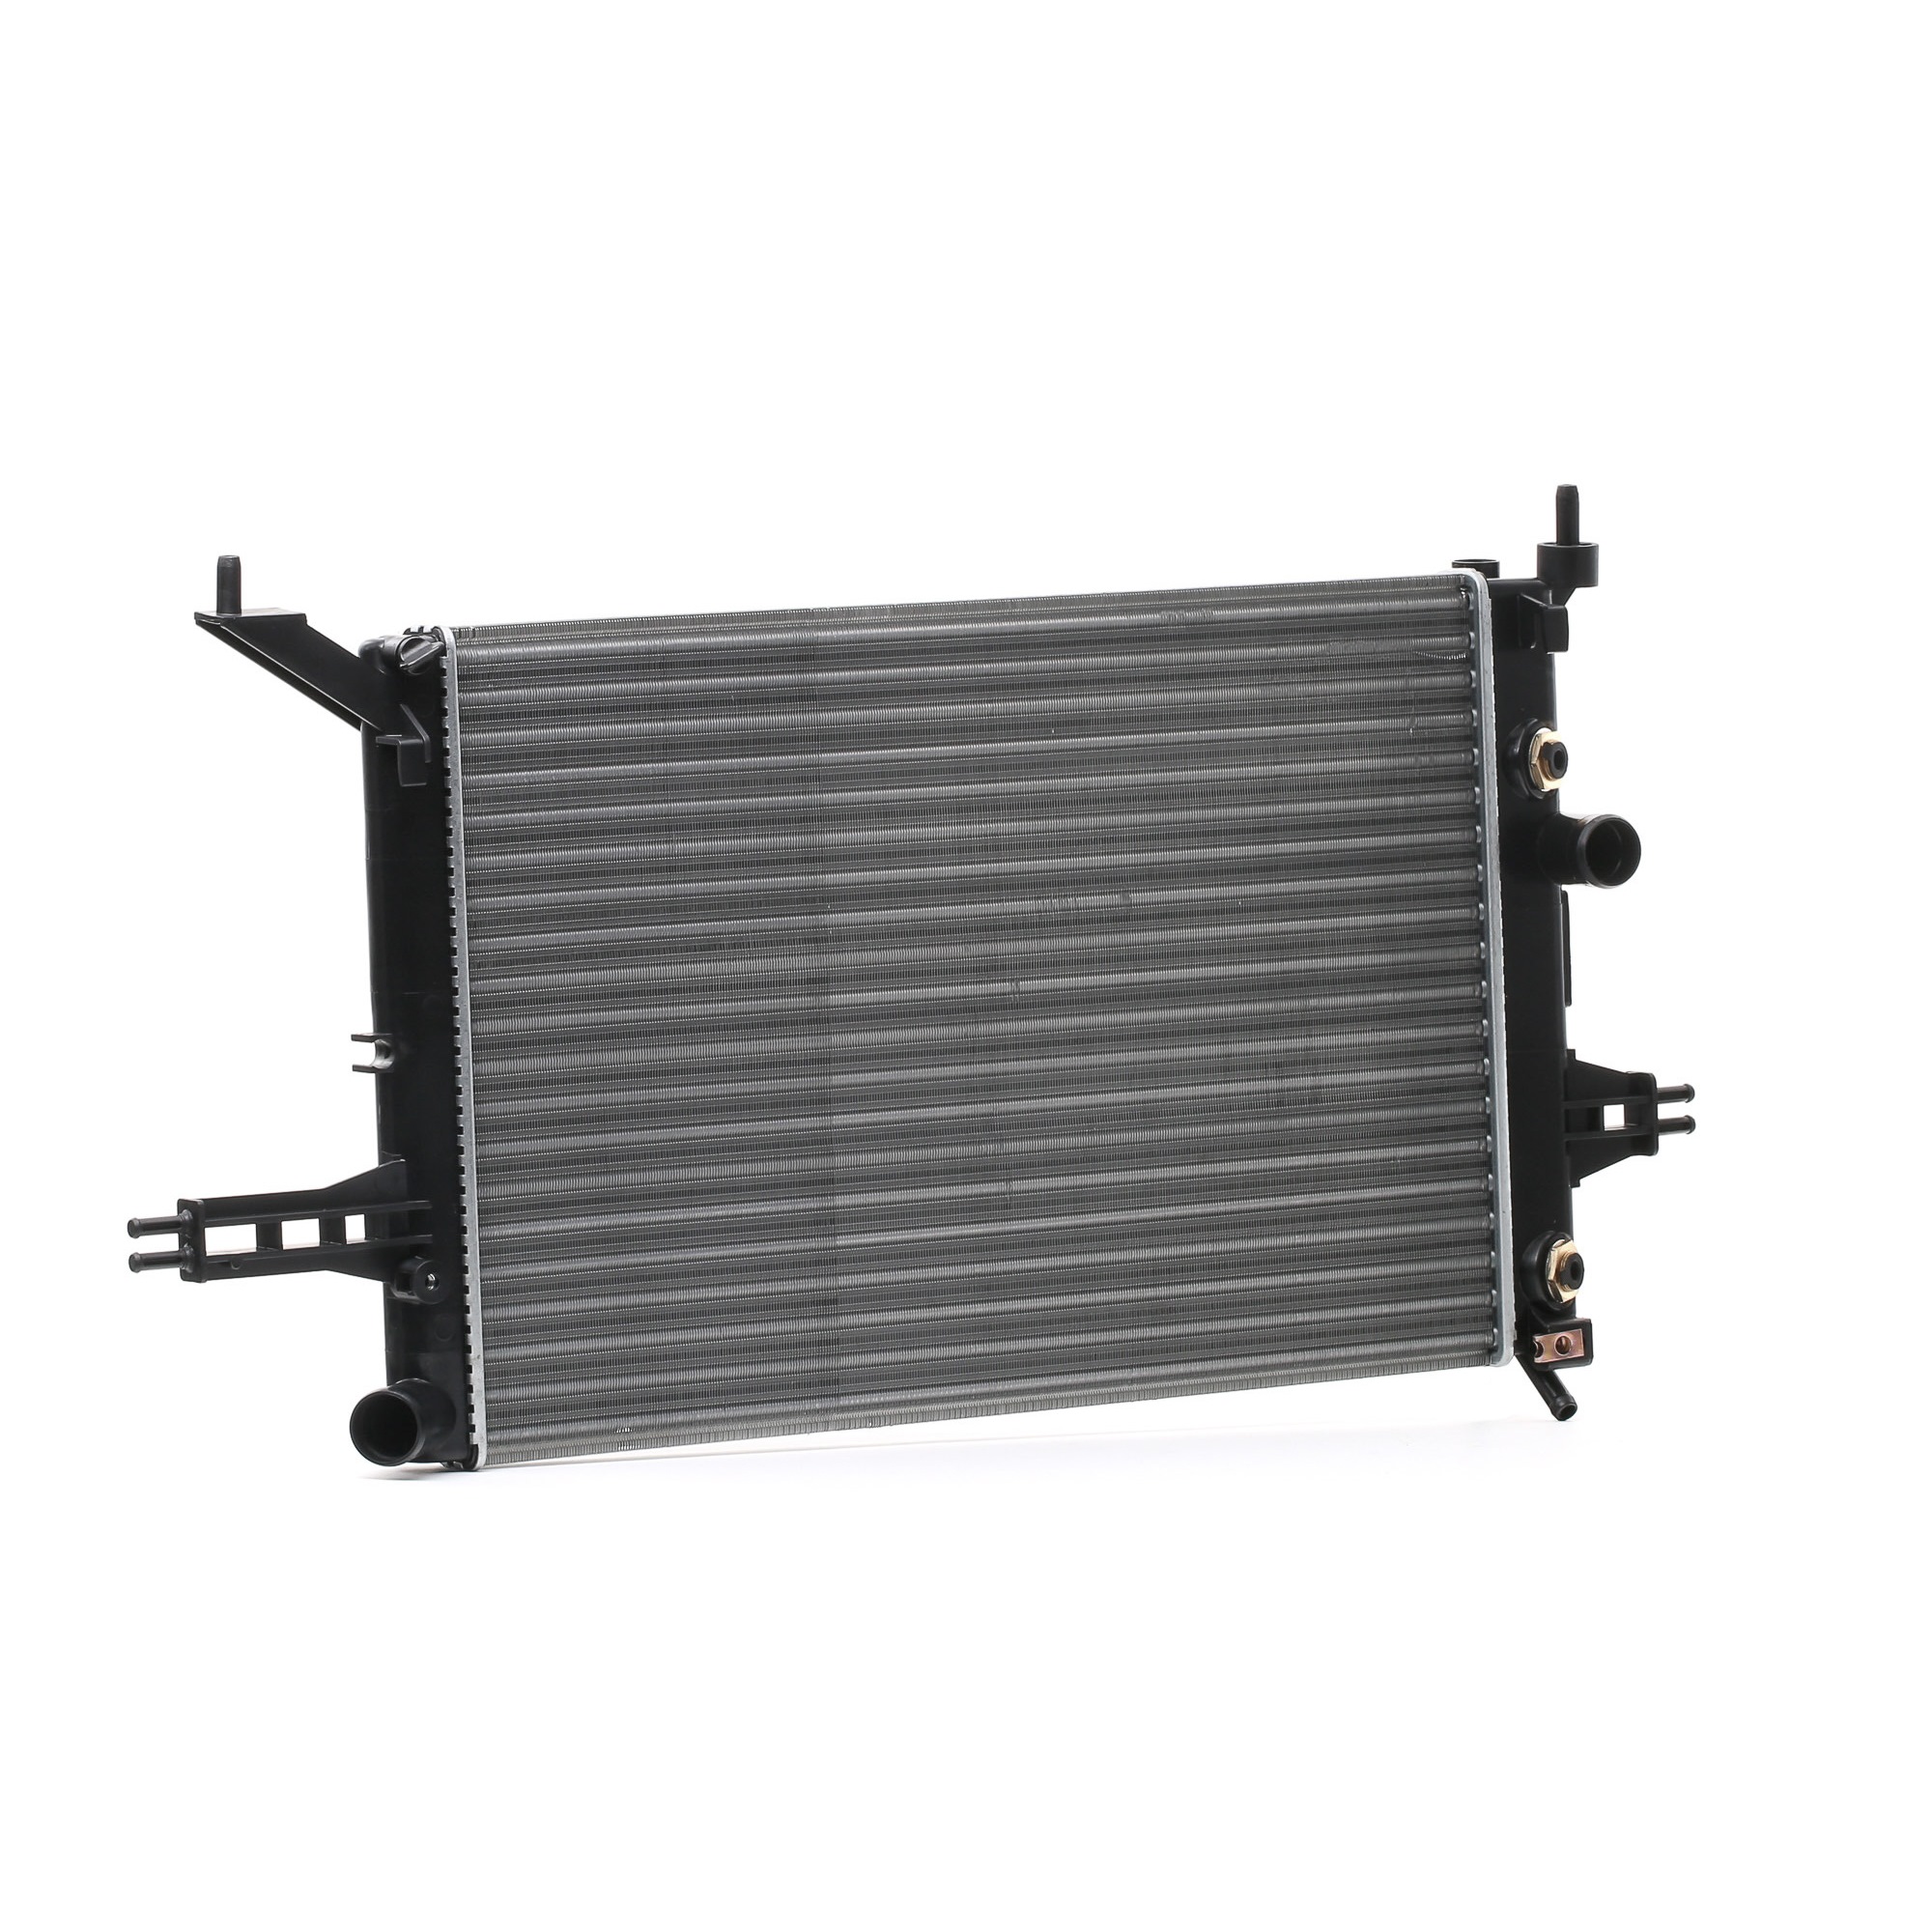 RIDEX 470R0617 Engine radiator Aluminium, Plastic, for vehicles without air conditioning, Fully Automatic